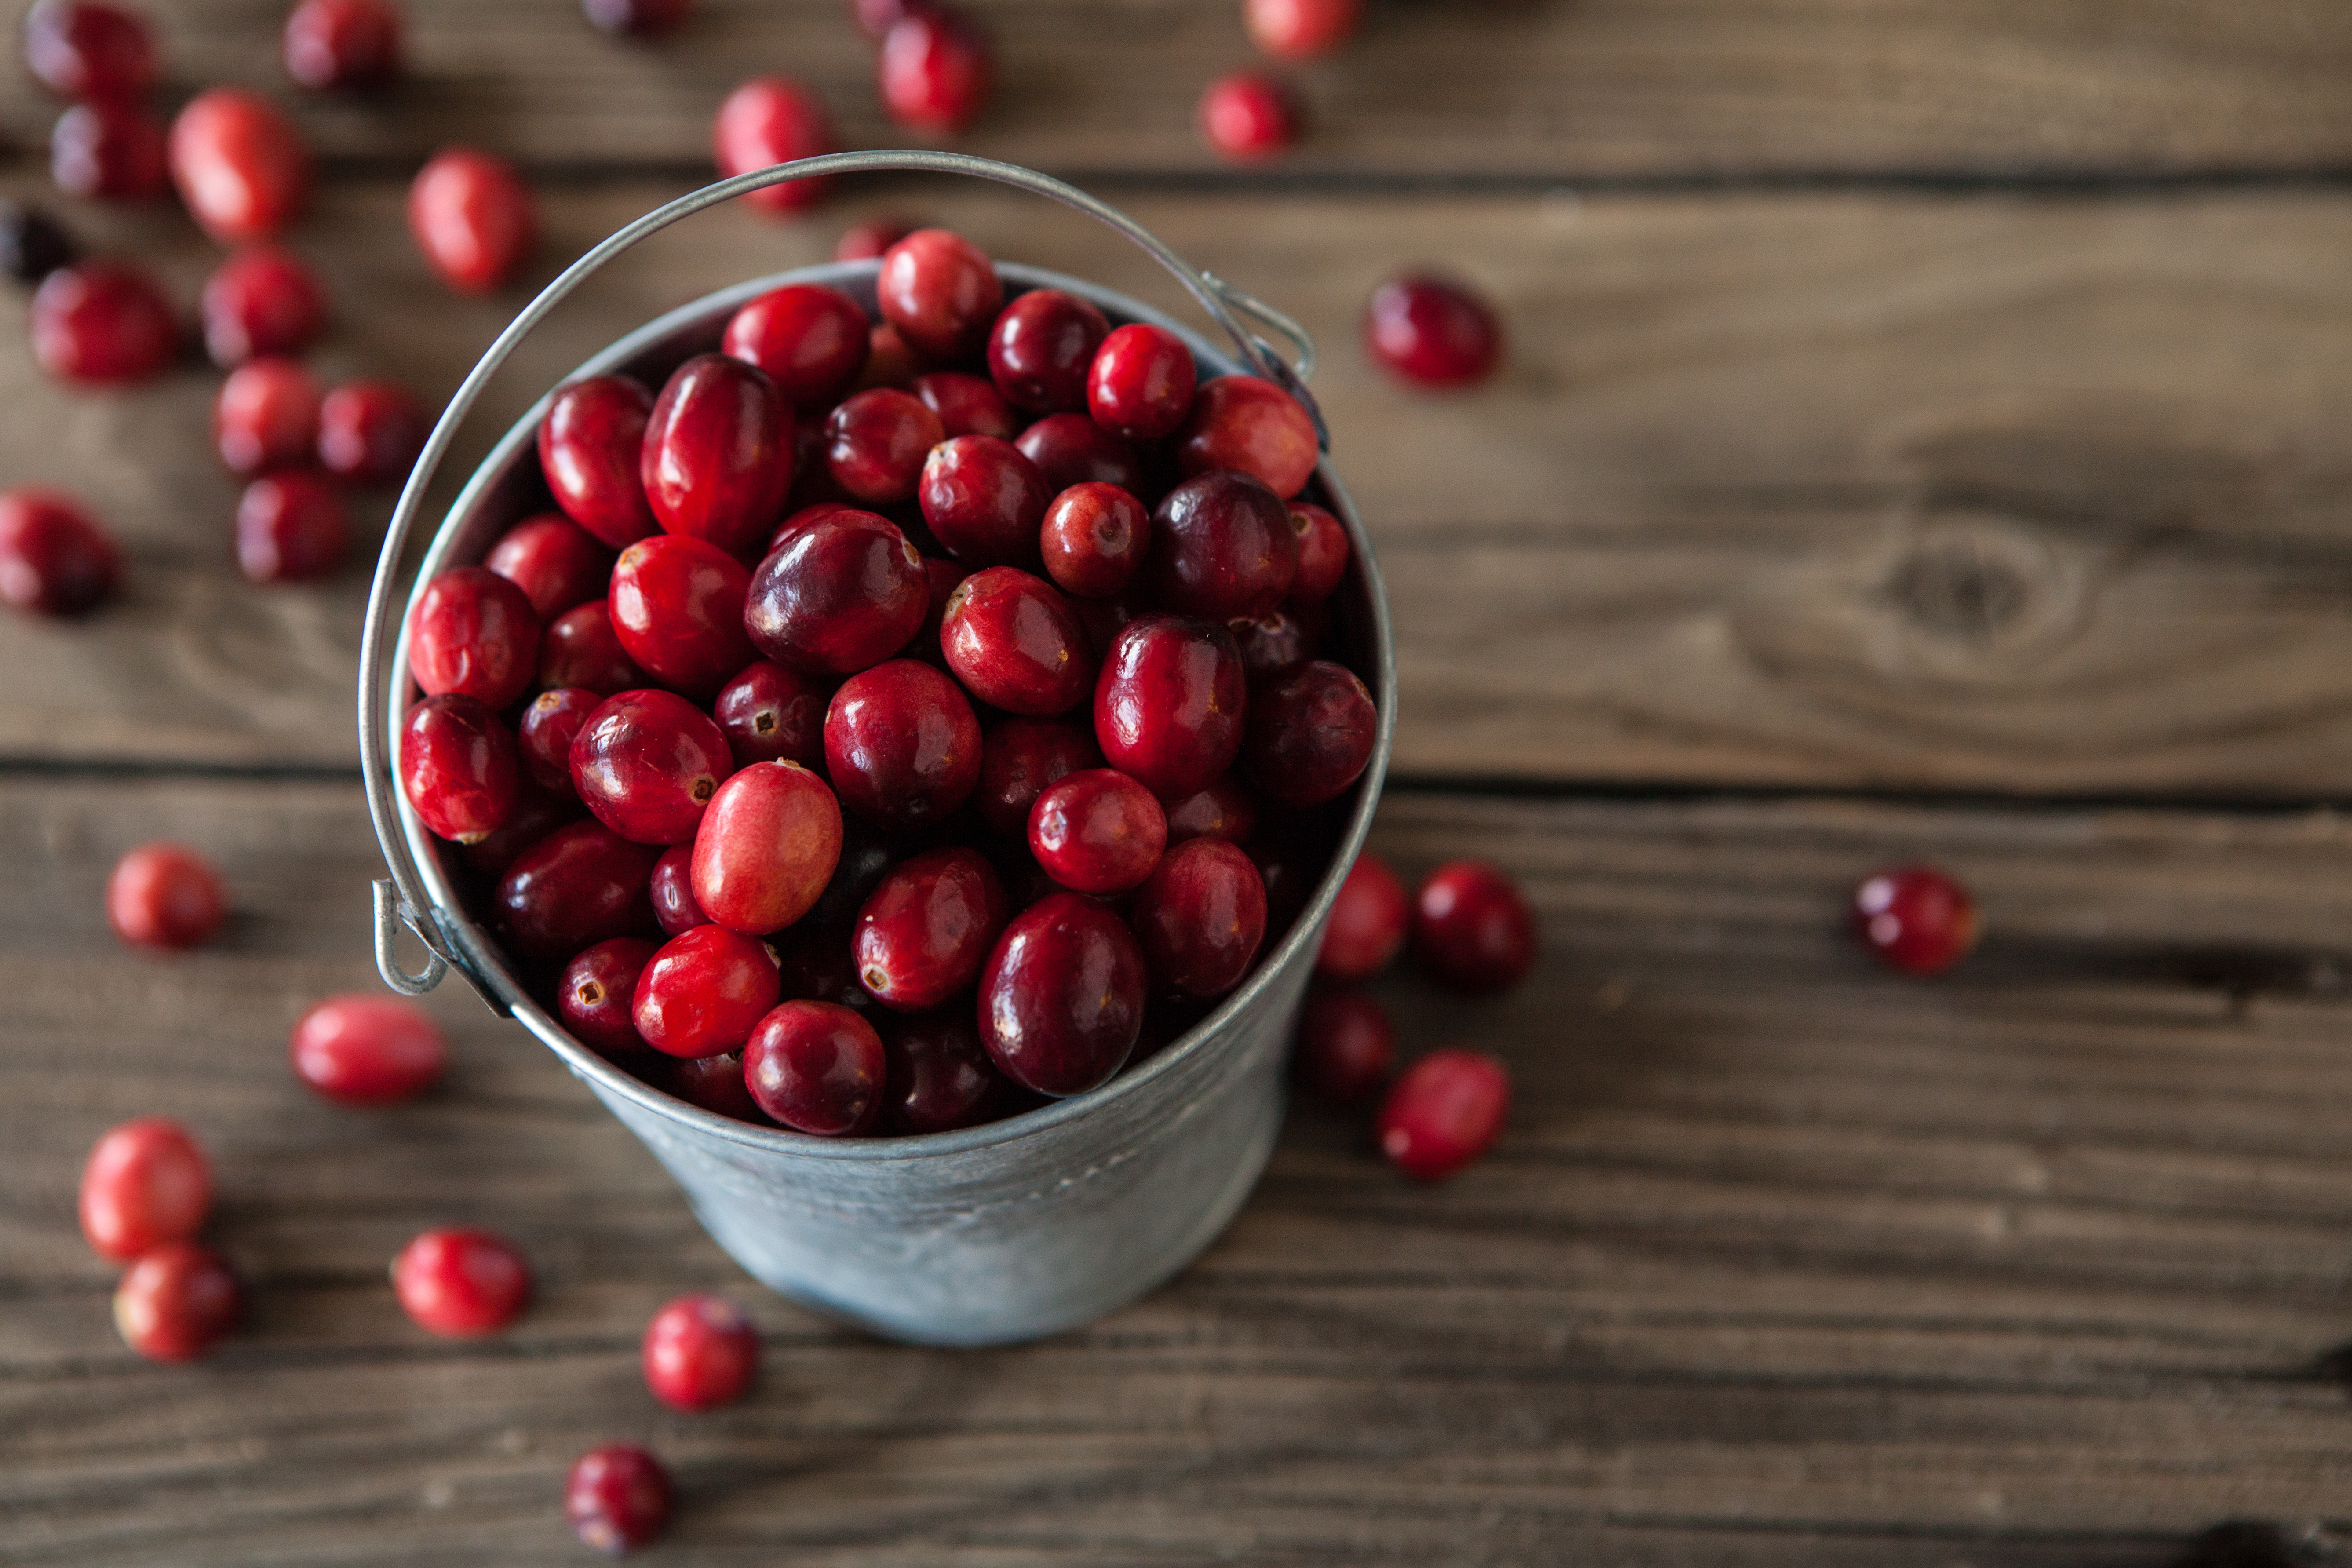 Does Cranberry Juice Irritate The Bladder? 